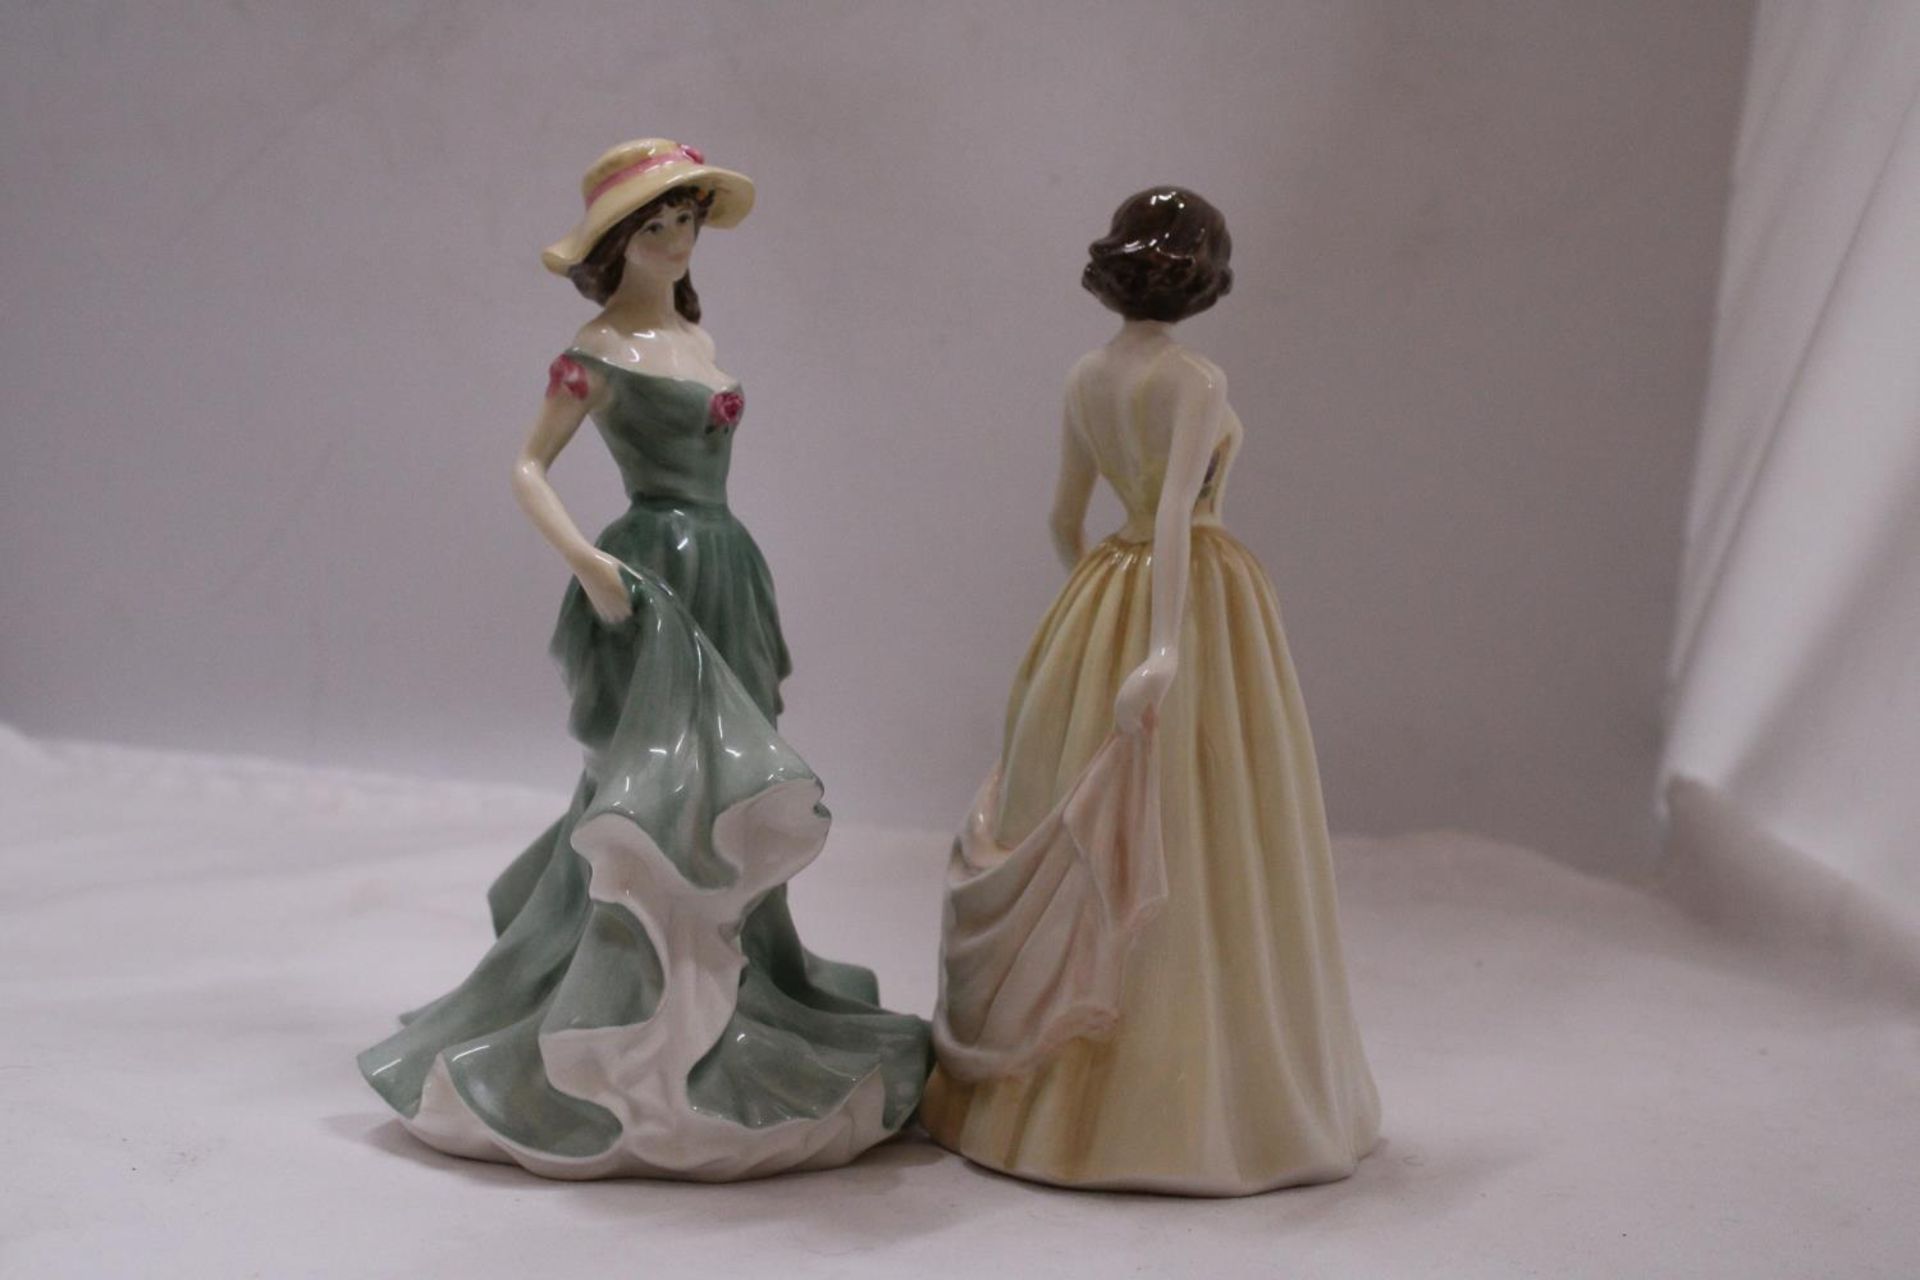 TWO ROYAL DOULTON FIGURINES TO INCLUDE "BEST WISHES" HN3971 AND "JENNIFER" HN4248 - Image 4 of 5